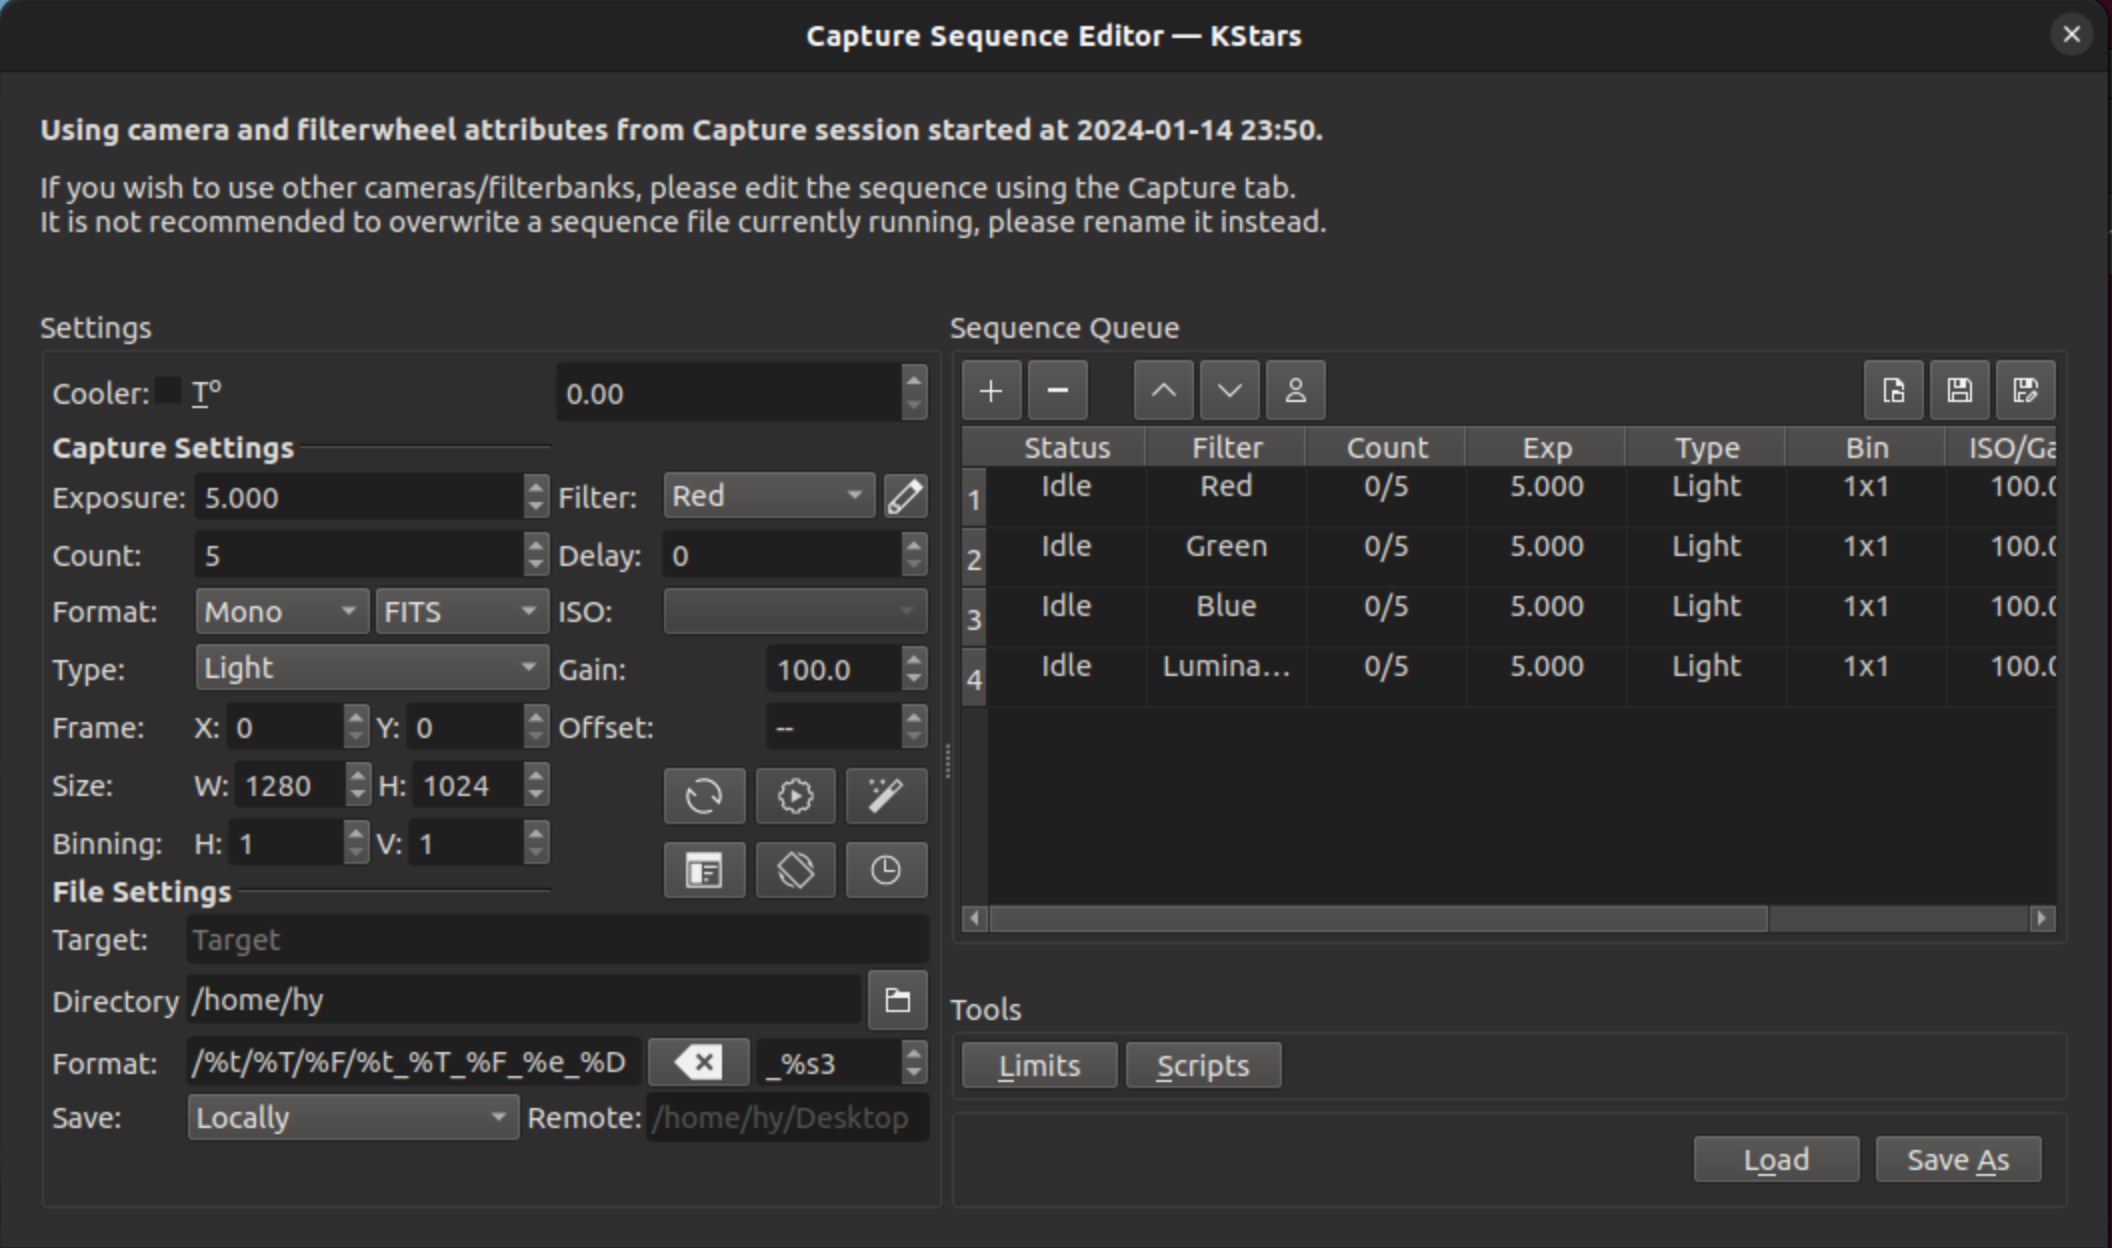 Capture Sequence Editor